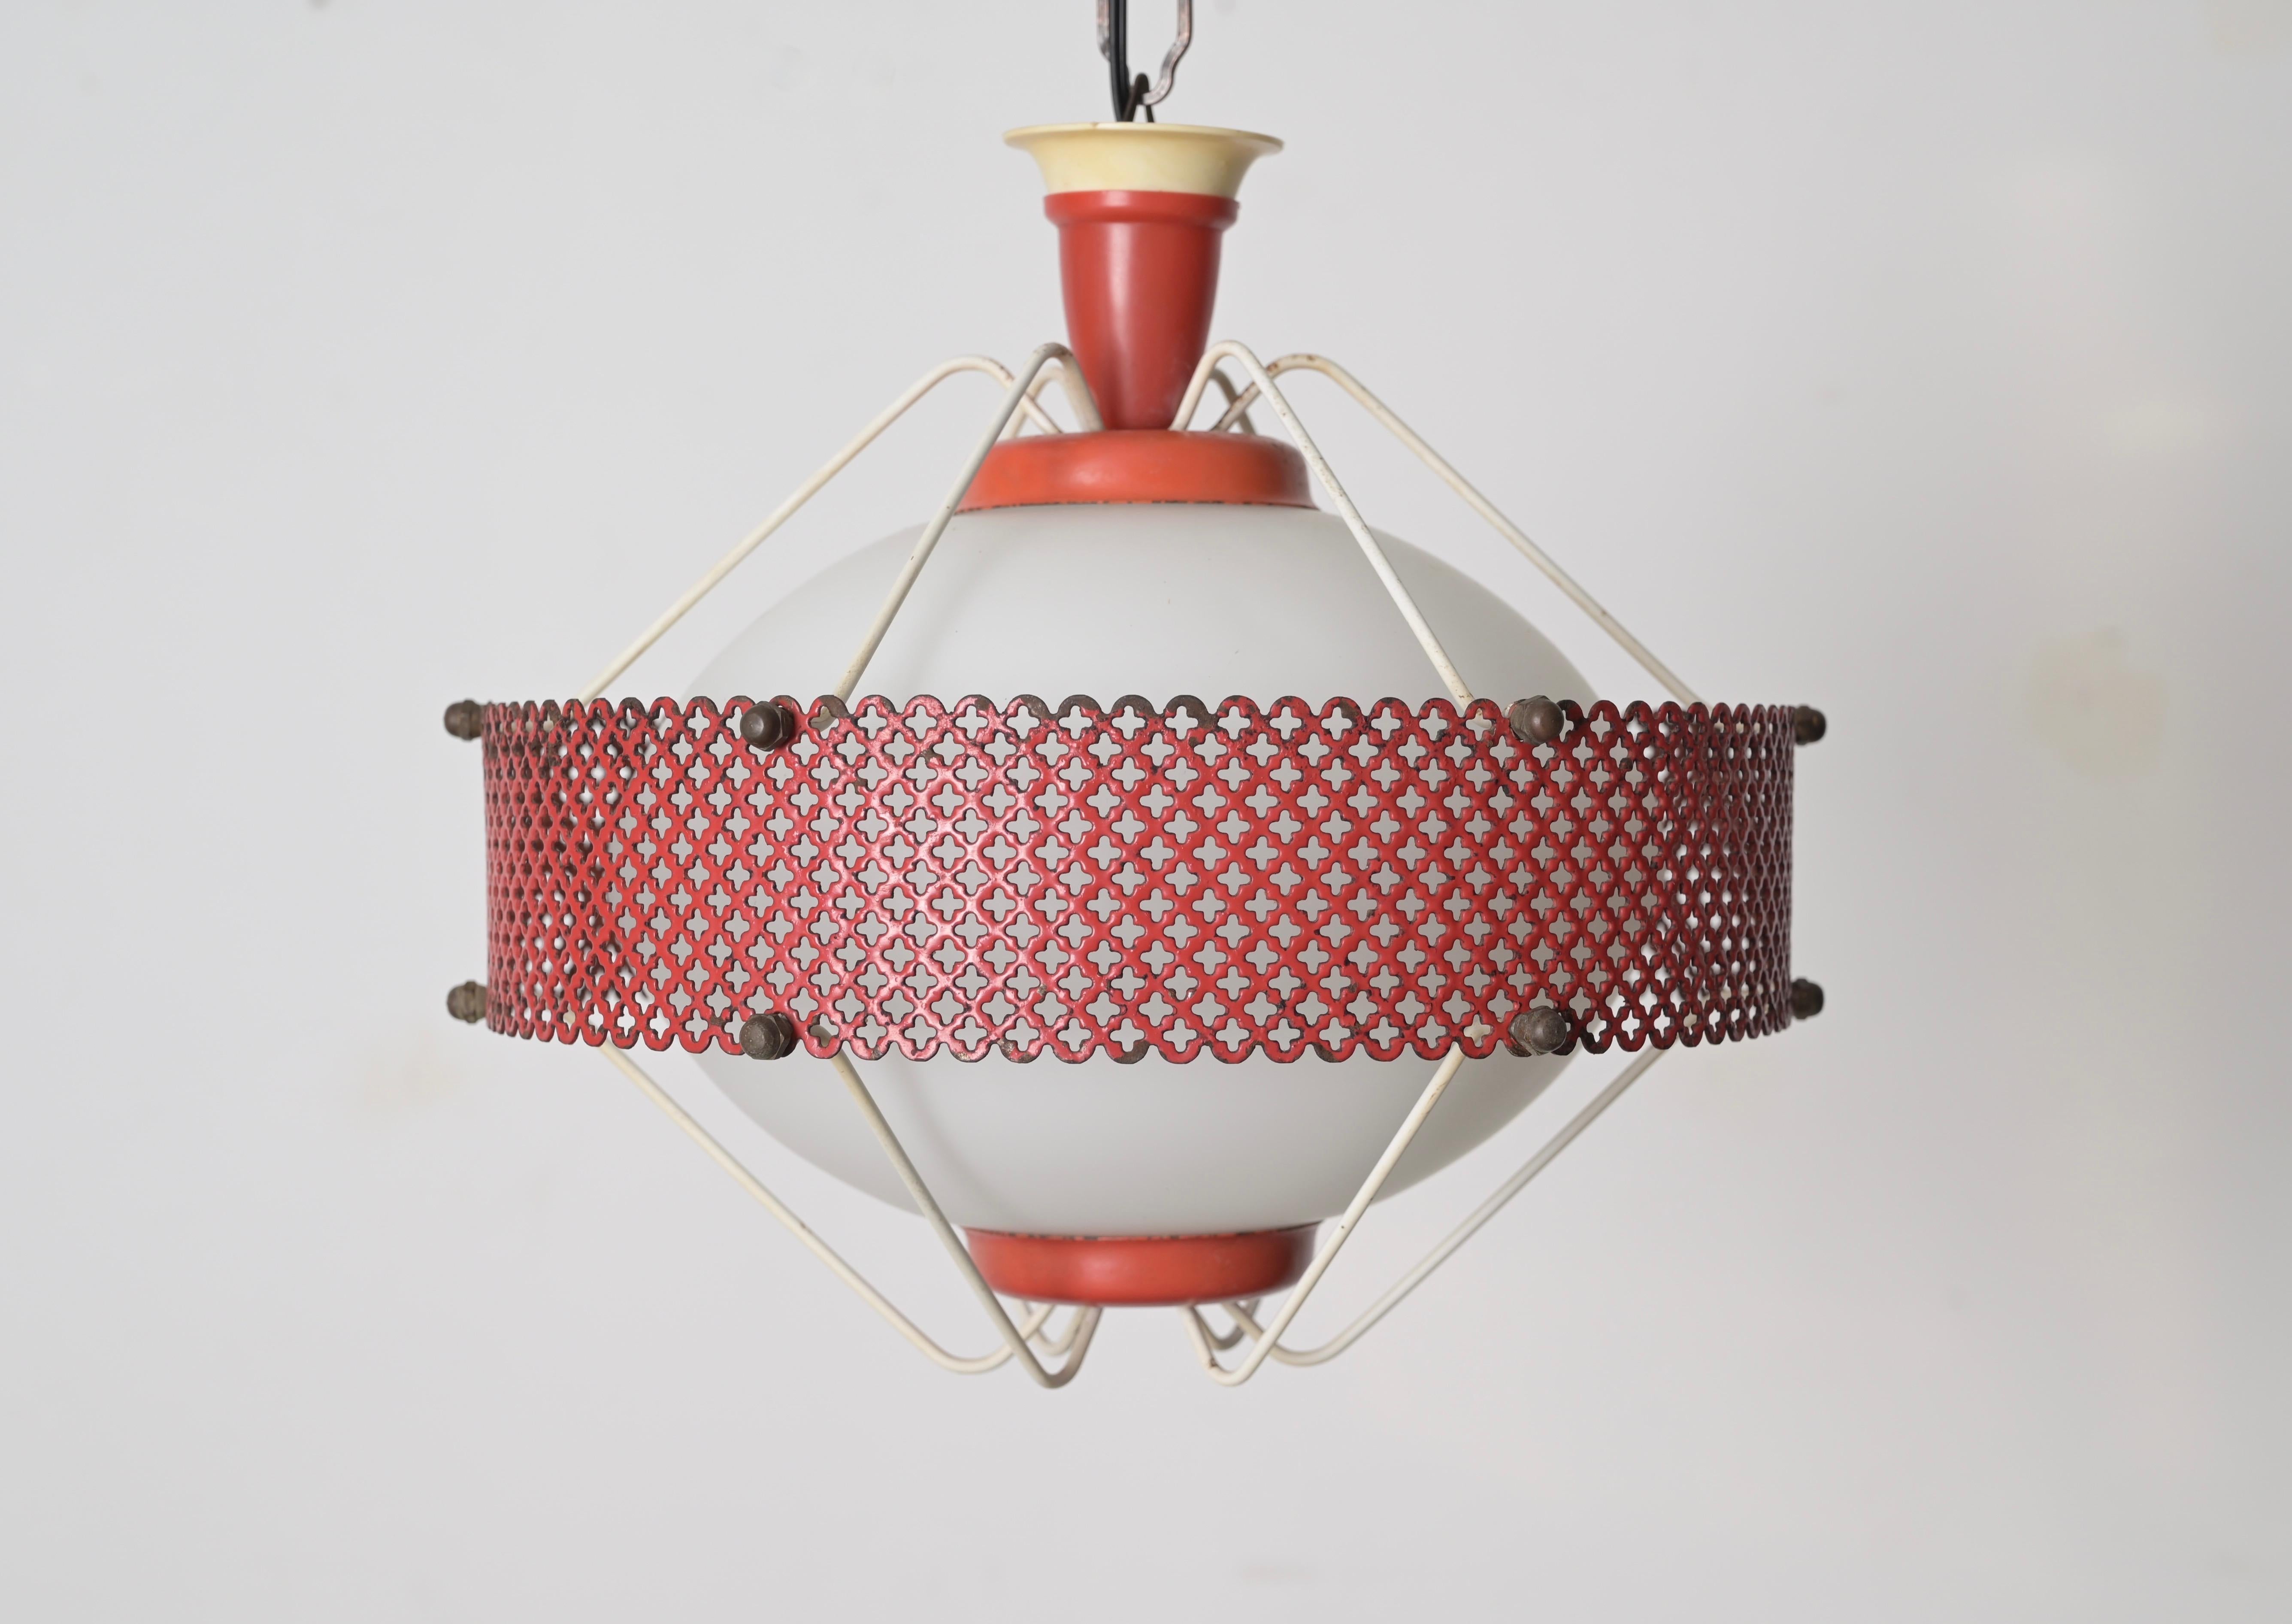 Mid-Century Modern Mathieu Matégot Pendant Lamps in Opal Glass, Red Metal, 1950s French Lighting For Sale